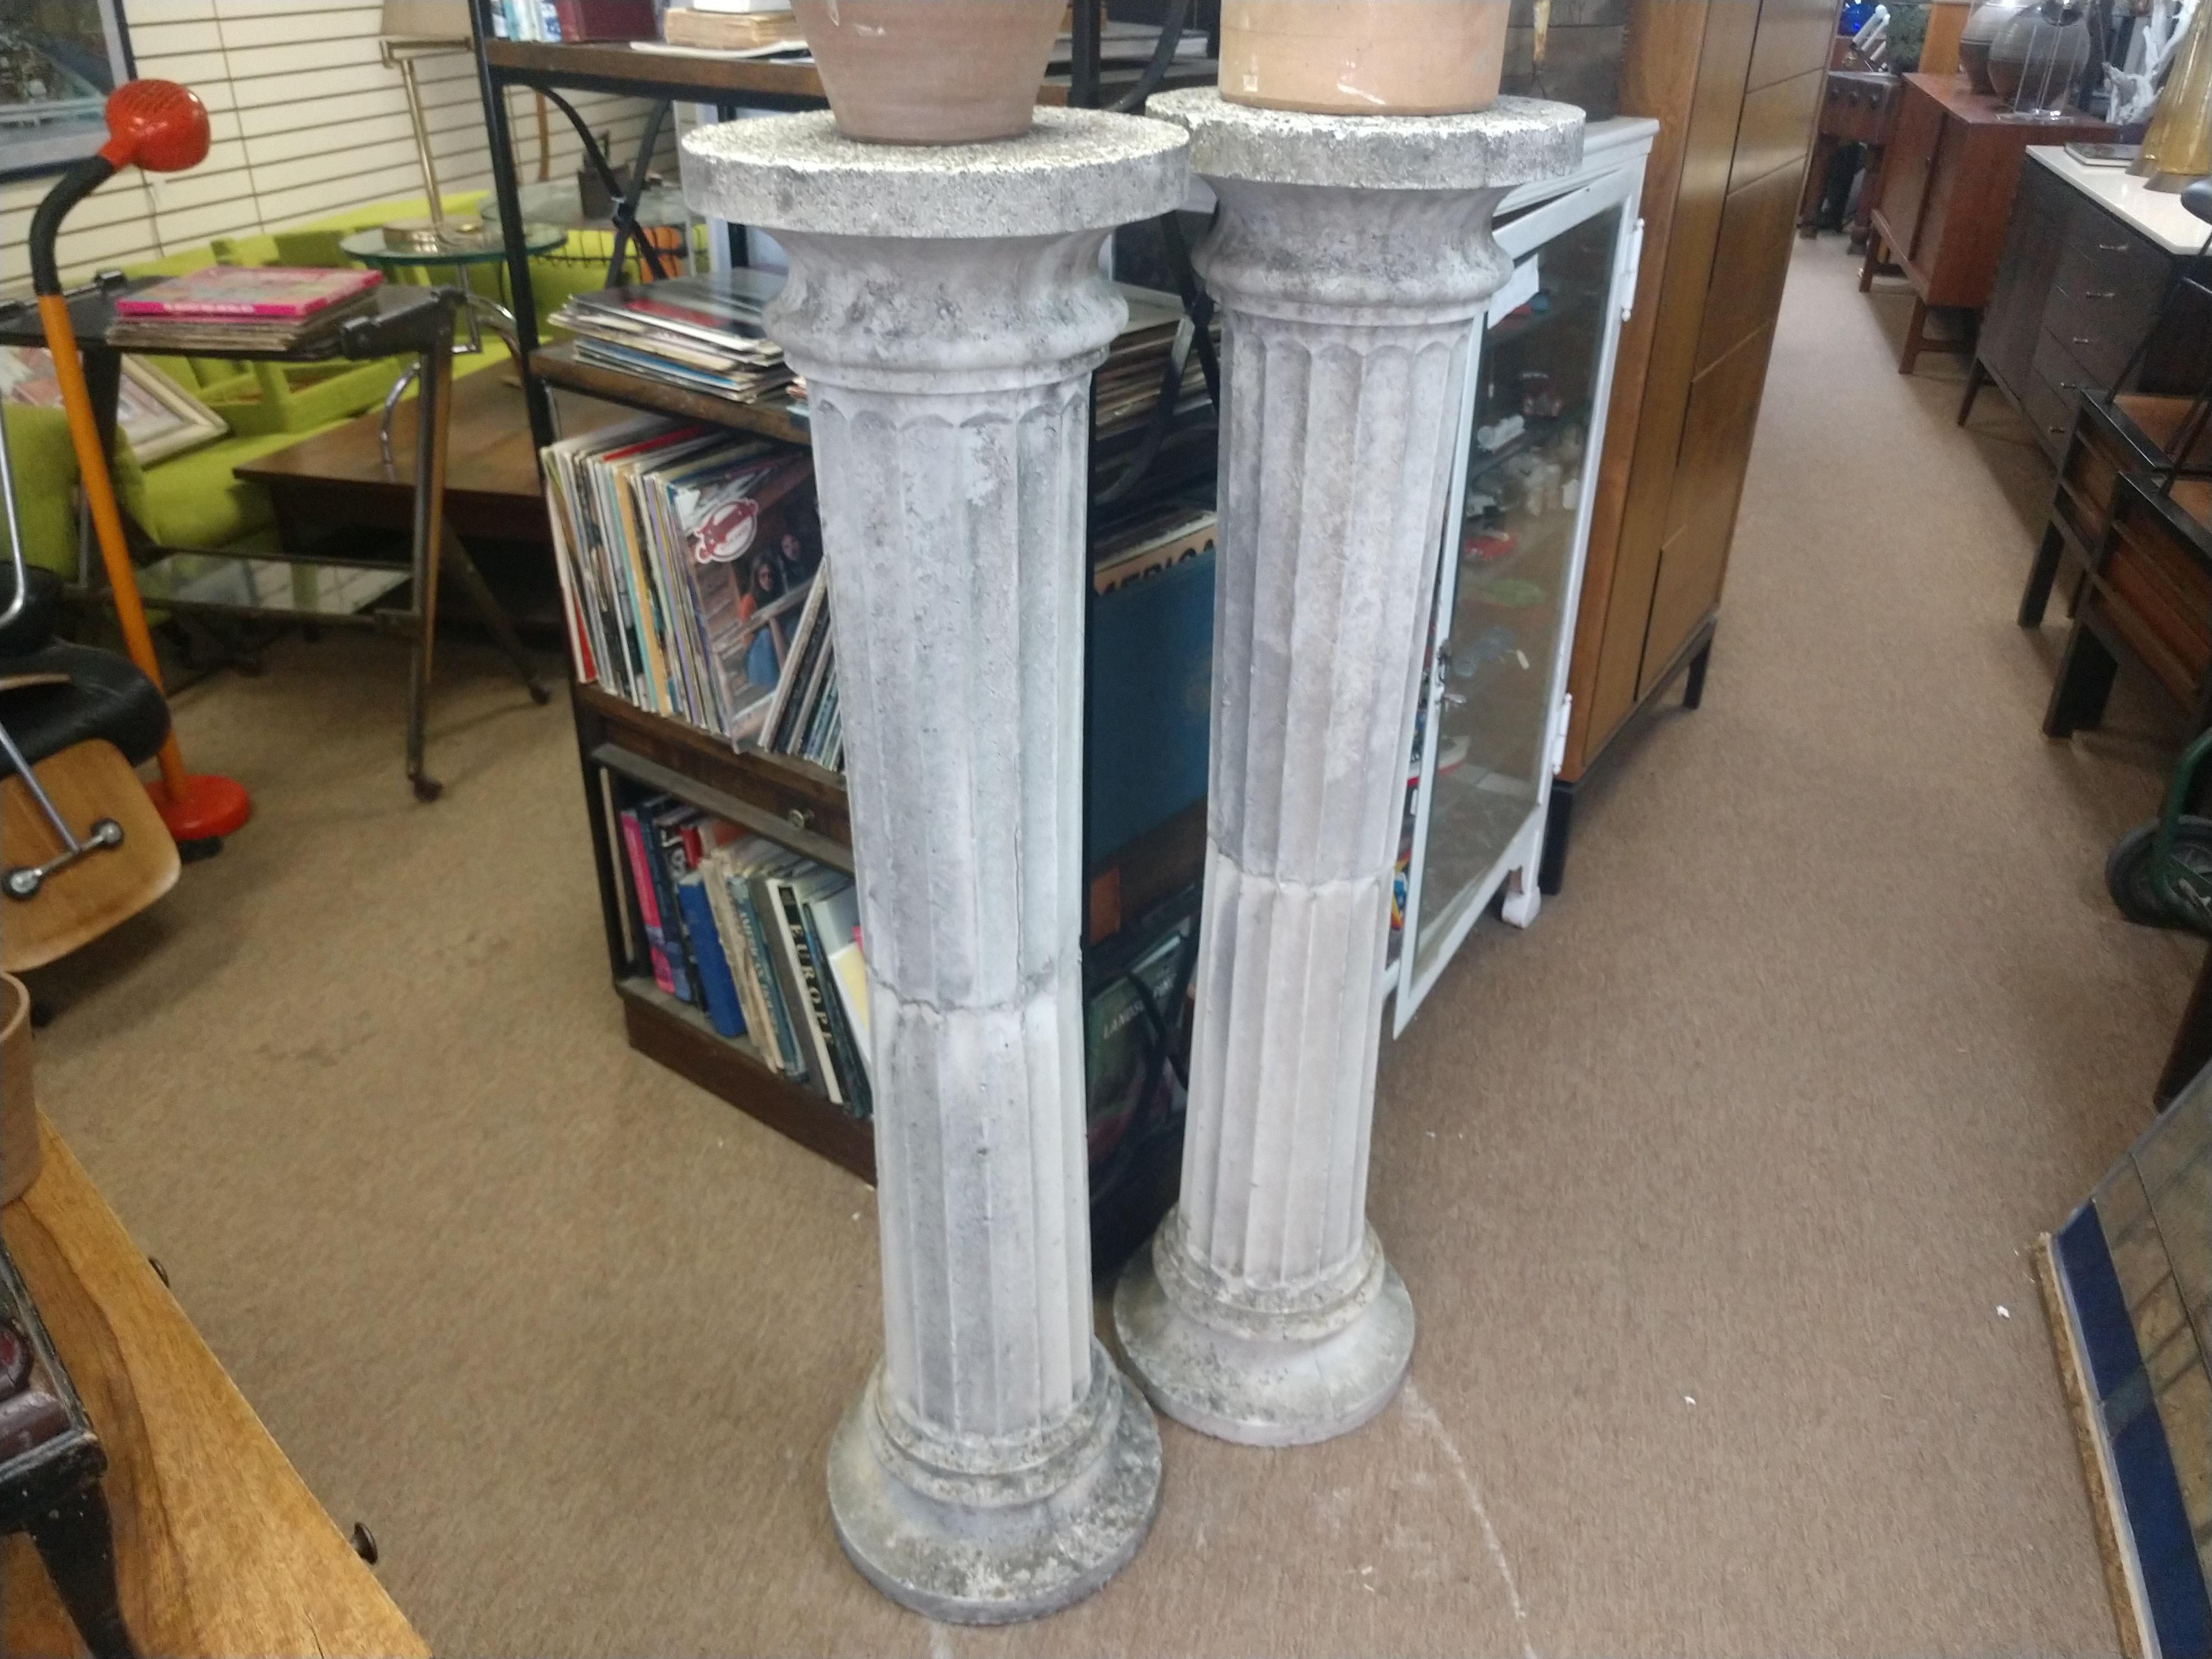 Pair of fabulous and heavy fluted pedestals, 53.5 inches tall. A very dramatic style, Greco-Roman, almost 14 inches in diameter at the base and top. Great for a large planter or simply stand by themselves, architectural art.